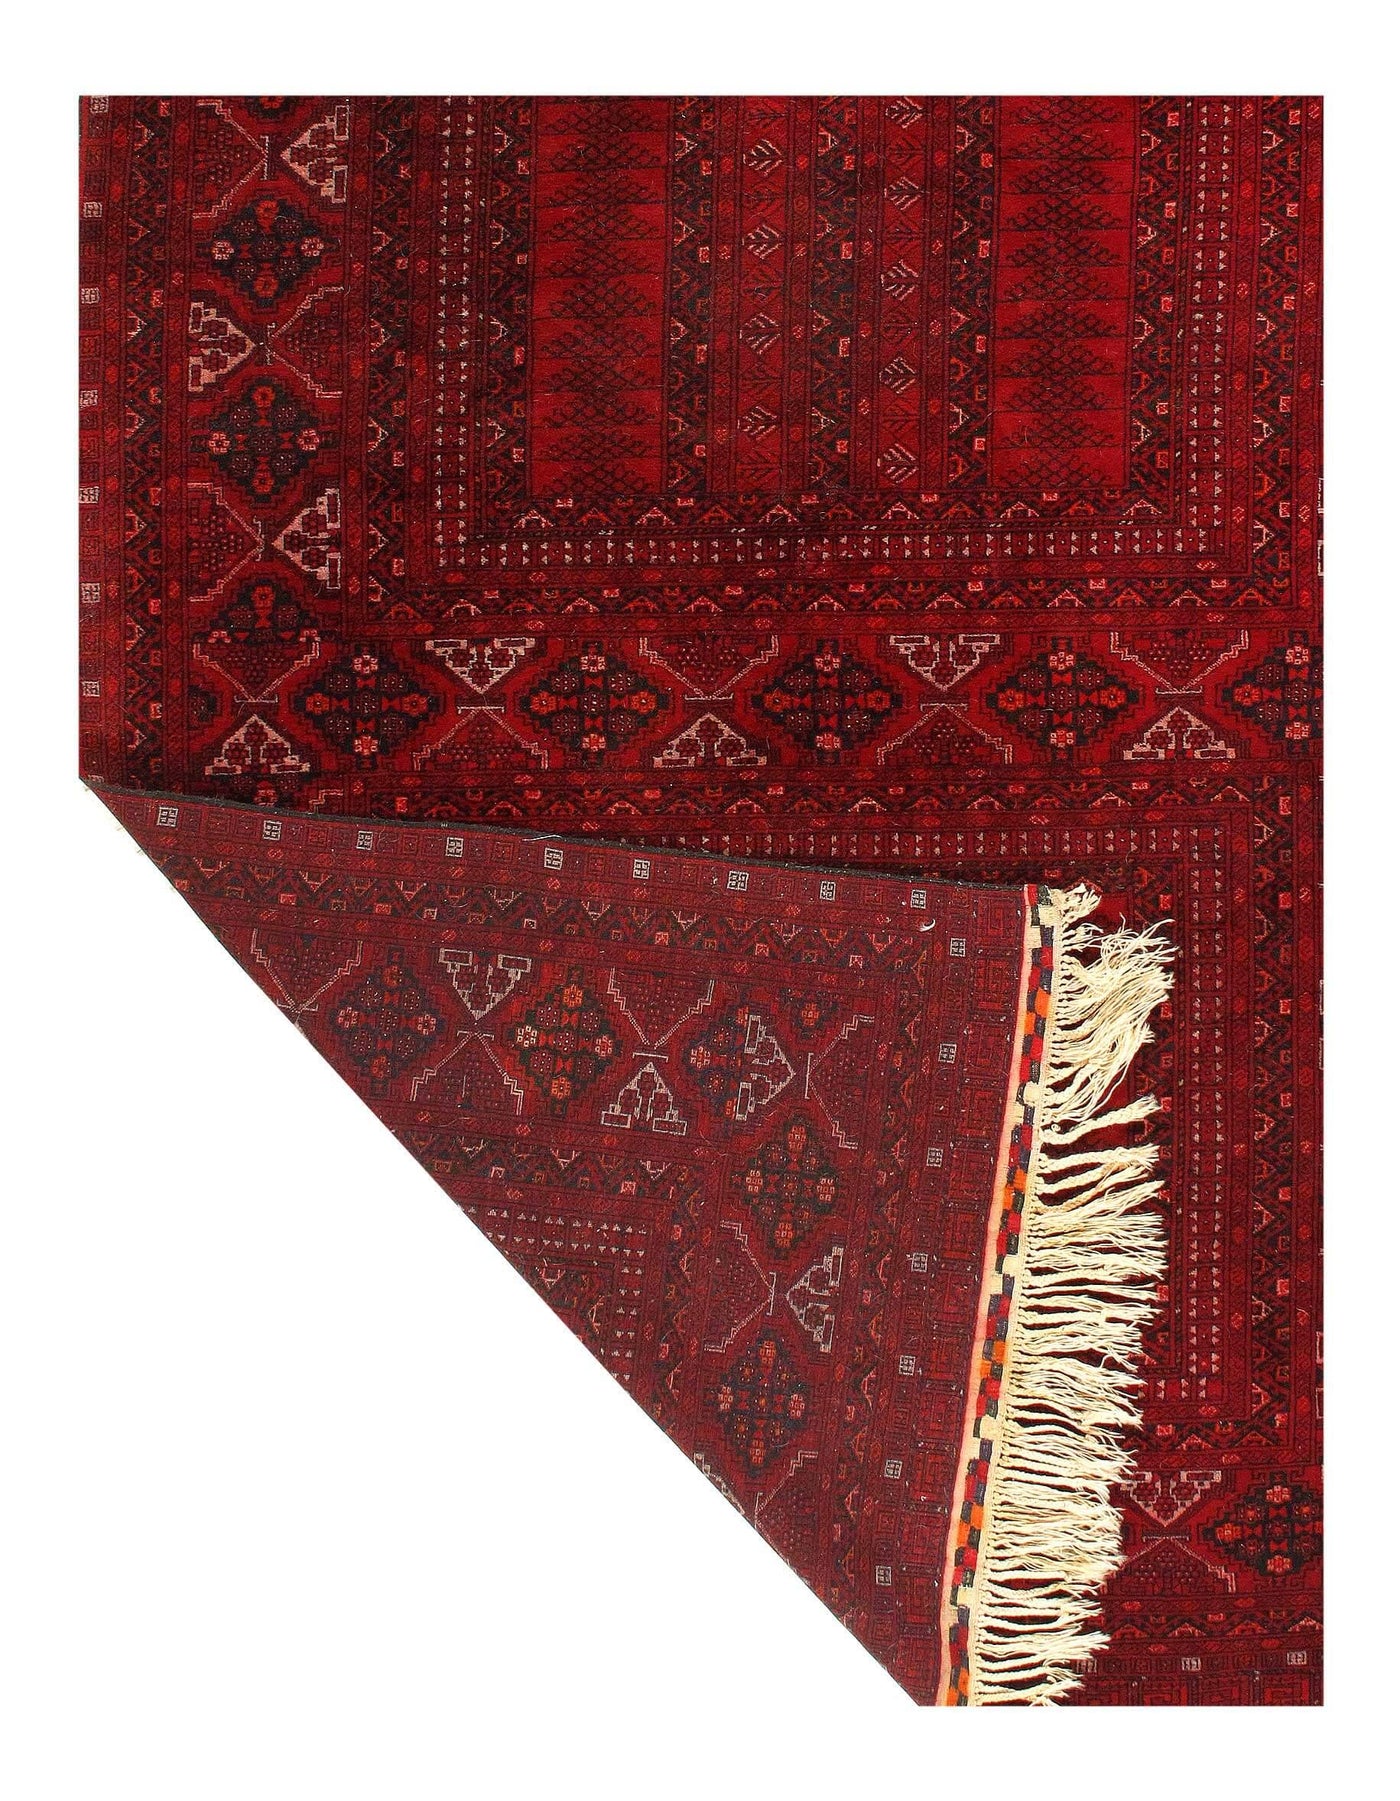 Canvello Antique Hand-Knotted Vintage Red Rug - 6' X 8'2''